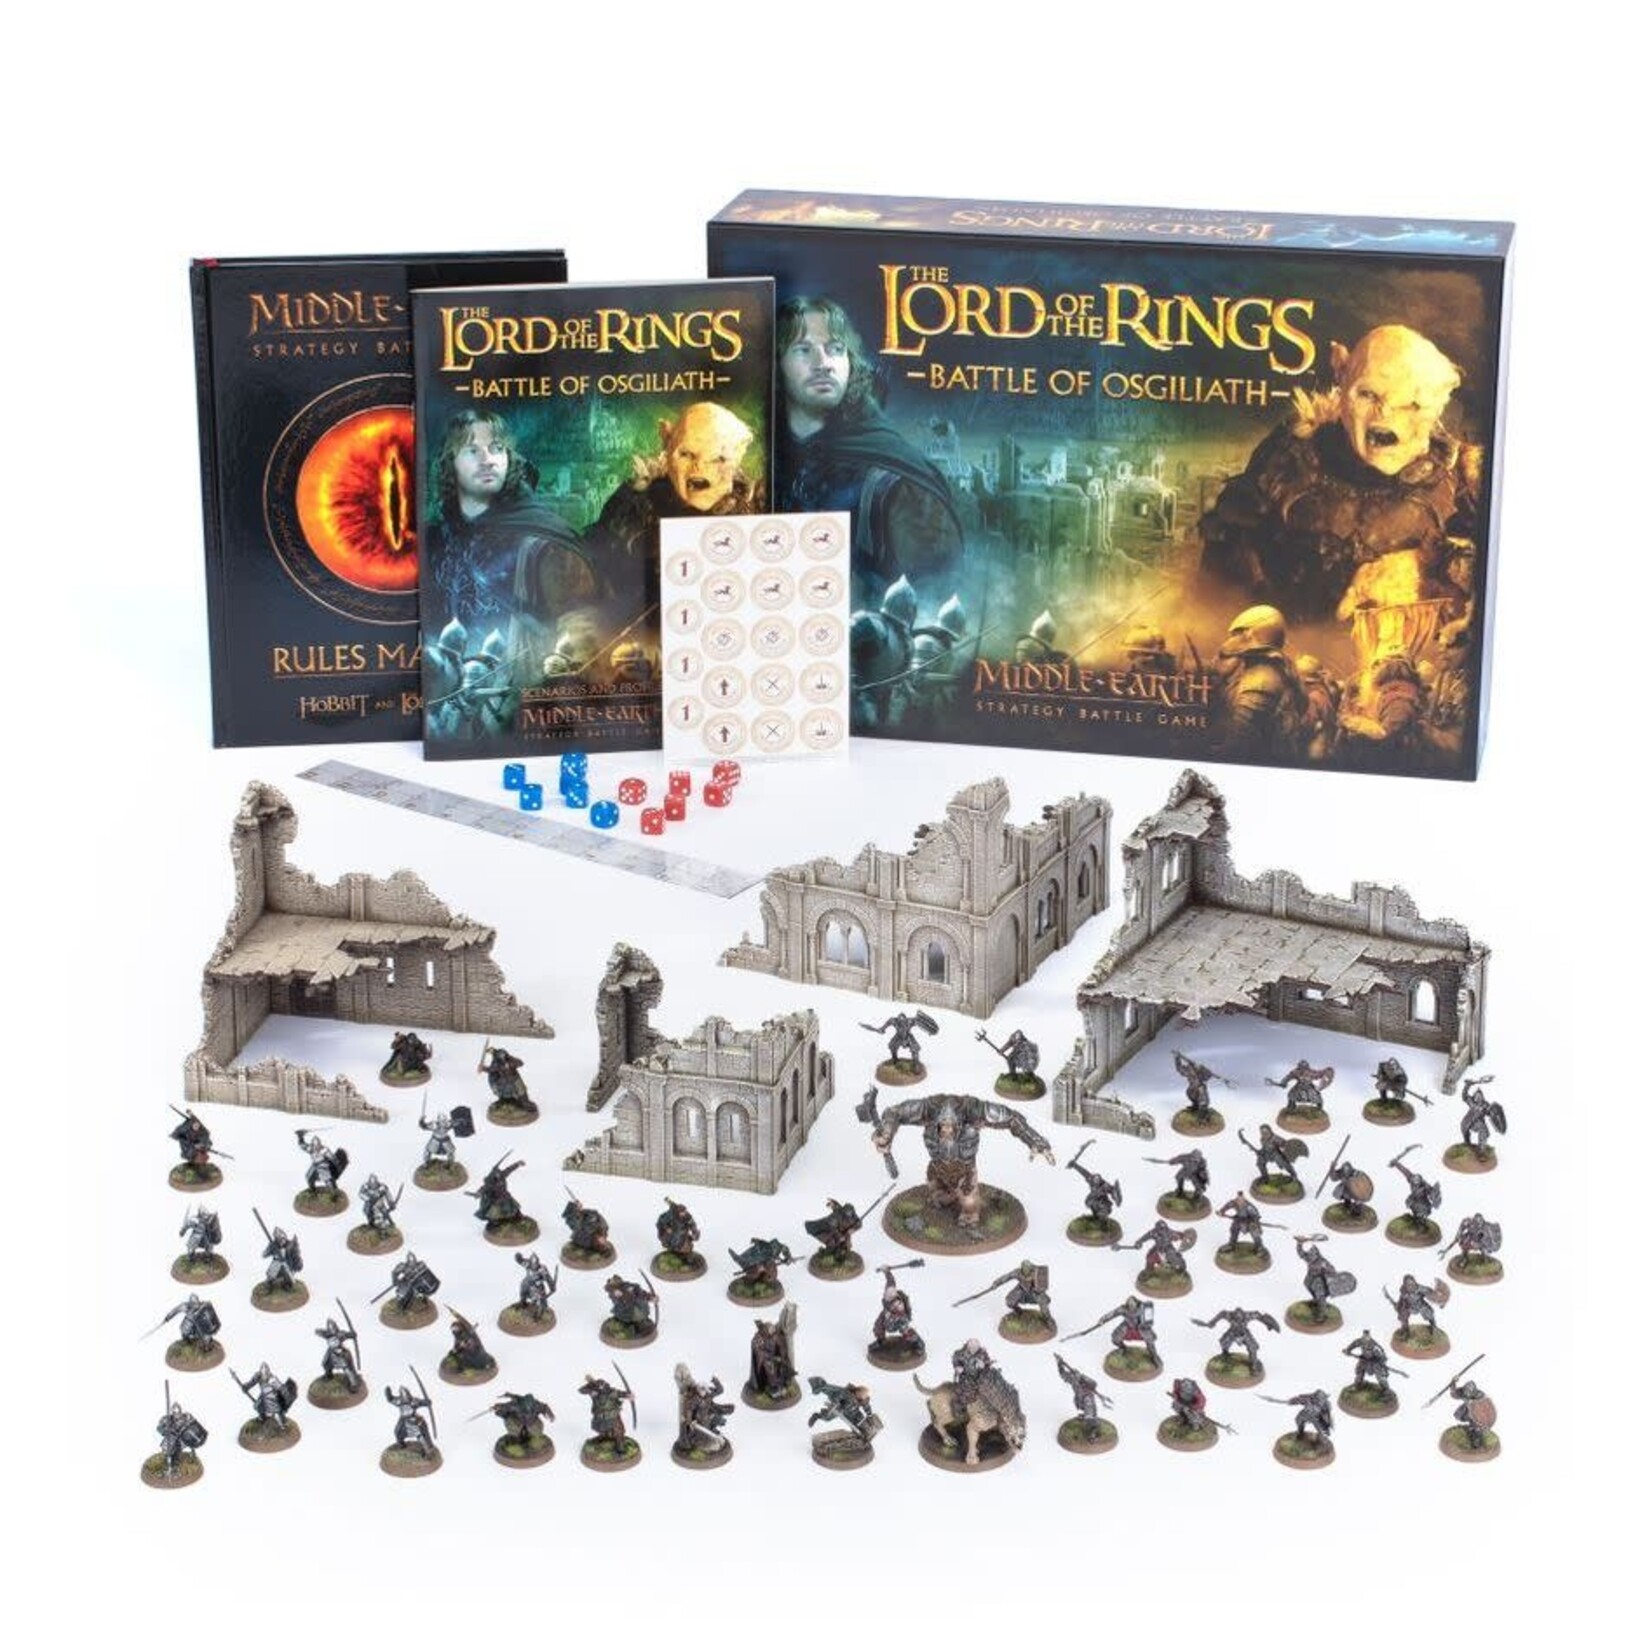 The Lord of the Rings Battle of Osgiliath Starter Set